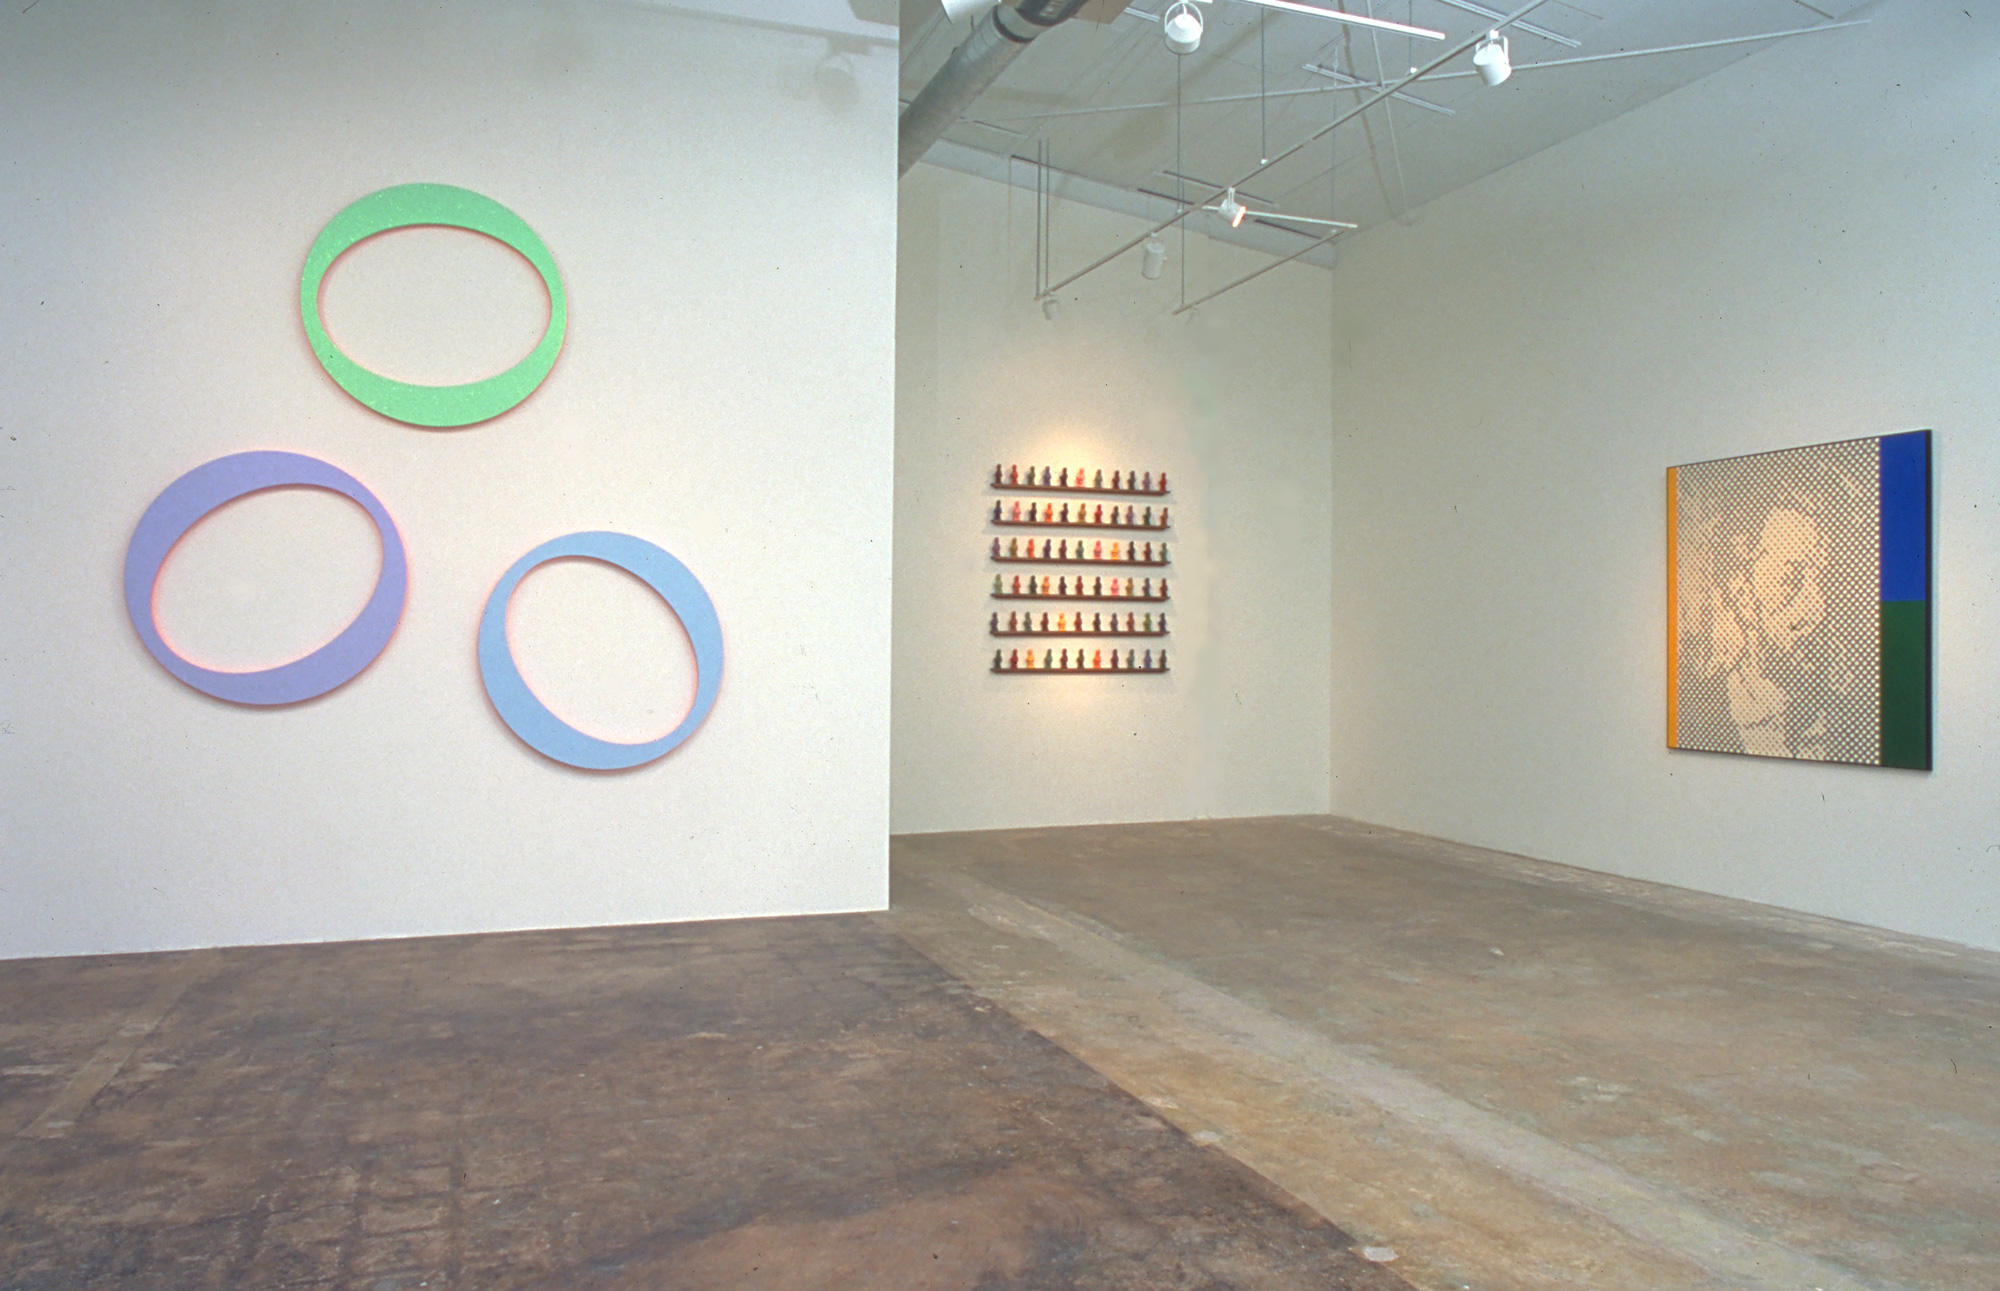 A photograph of an installation view. On the left are three round pieces of art, colored green, purple and blue. On the right is a pixellated rendition of a face flanked by blocks of yellow, blue and green.